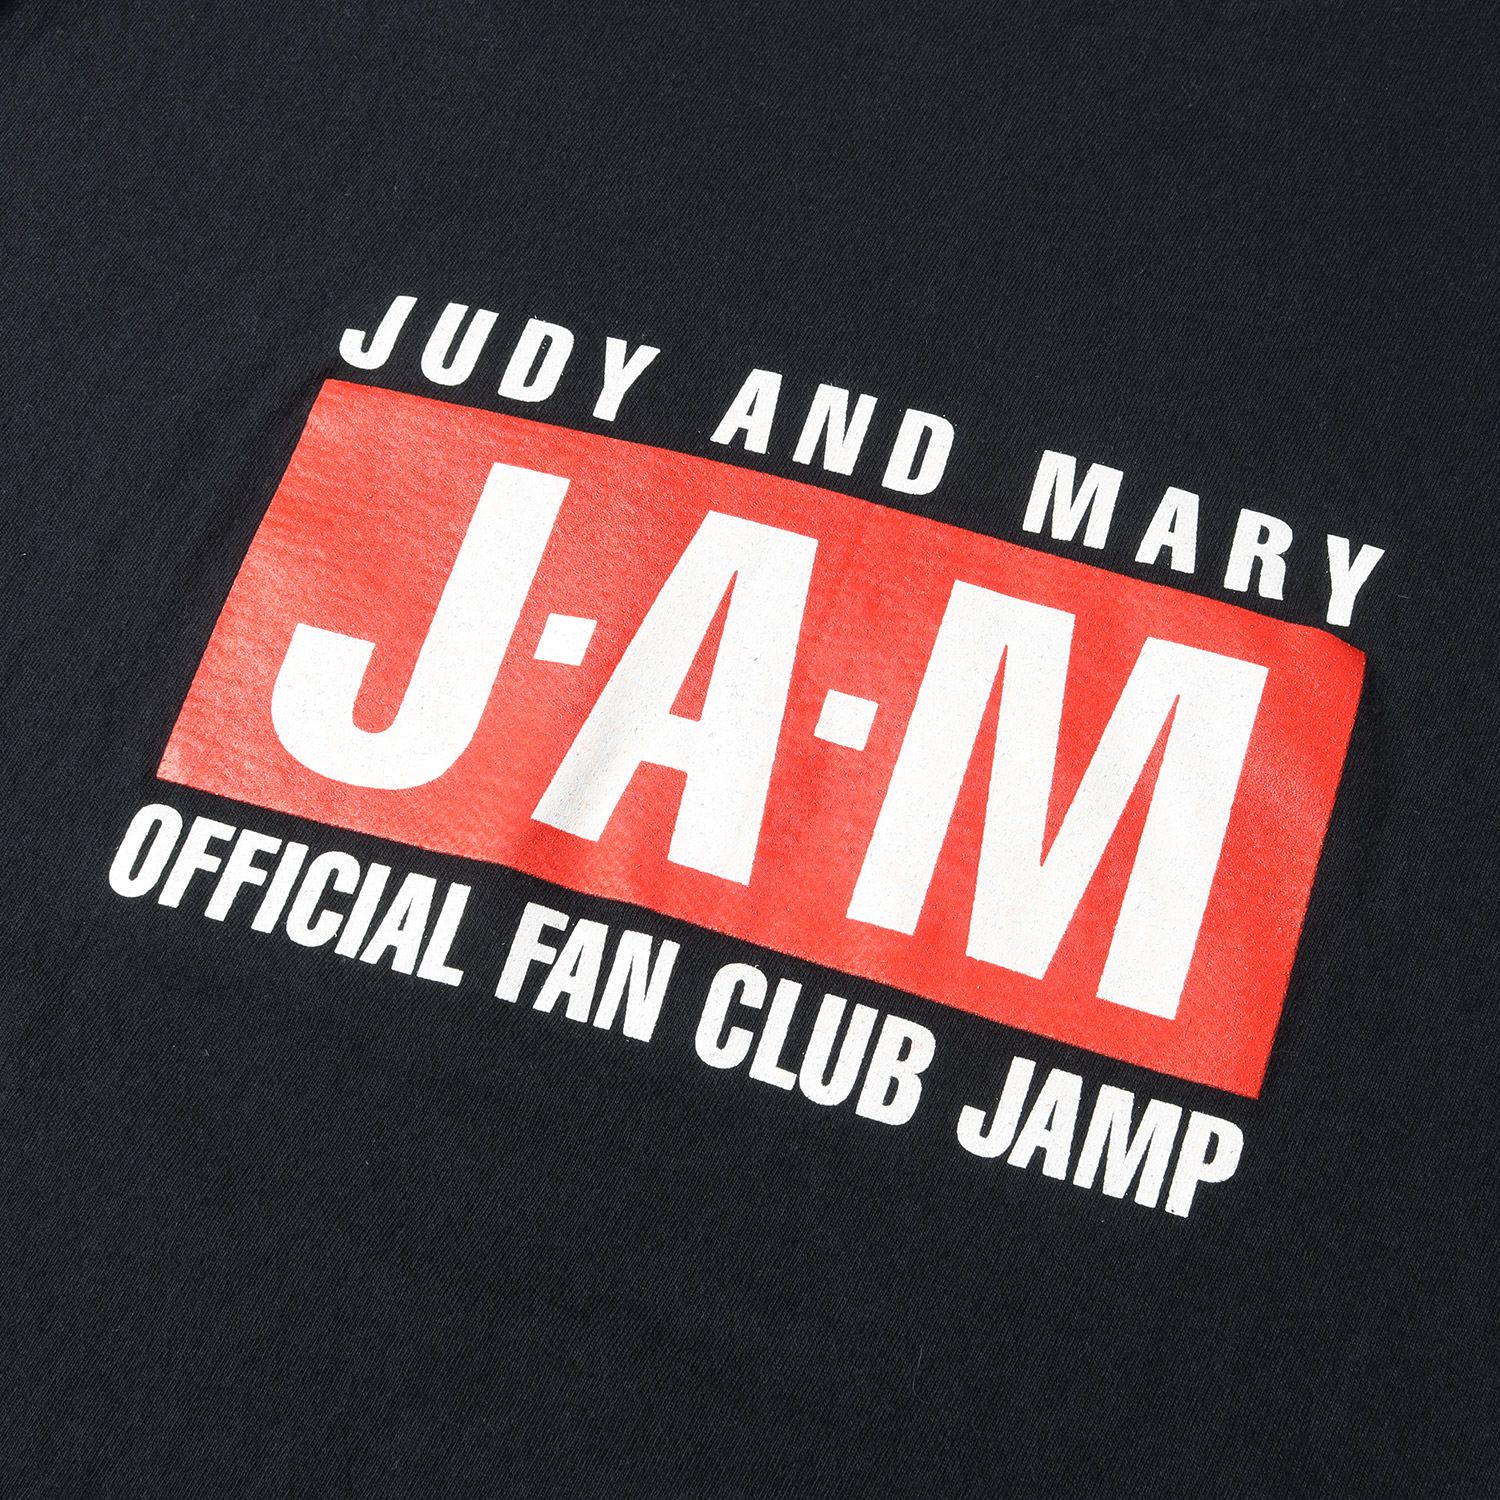 JUDY AND MARY OFFICIAL FAN CLUB Tシャツ！ - ミュージシャン